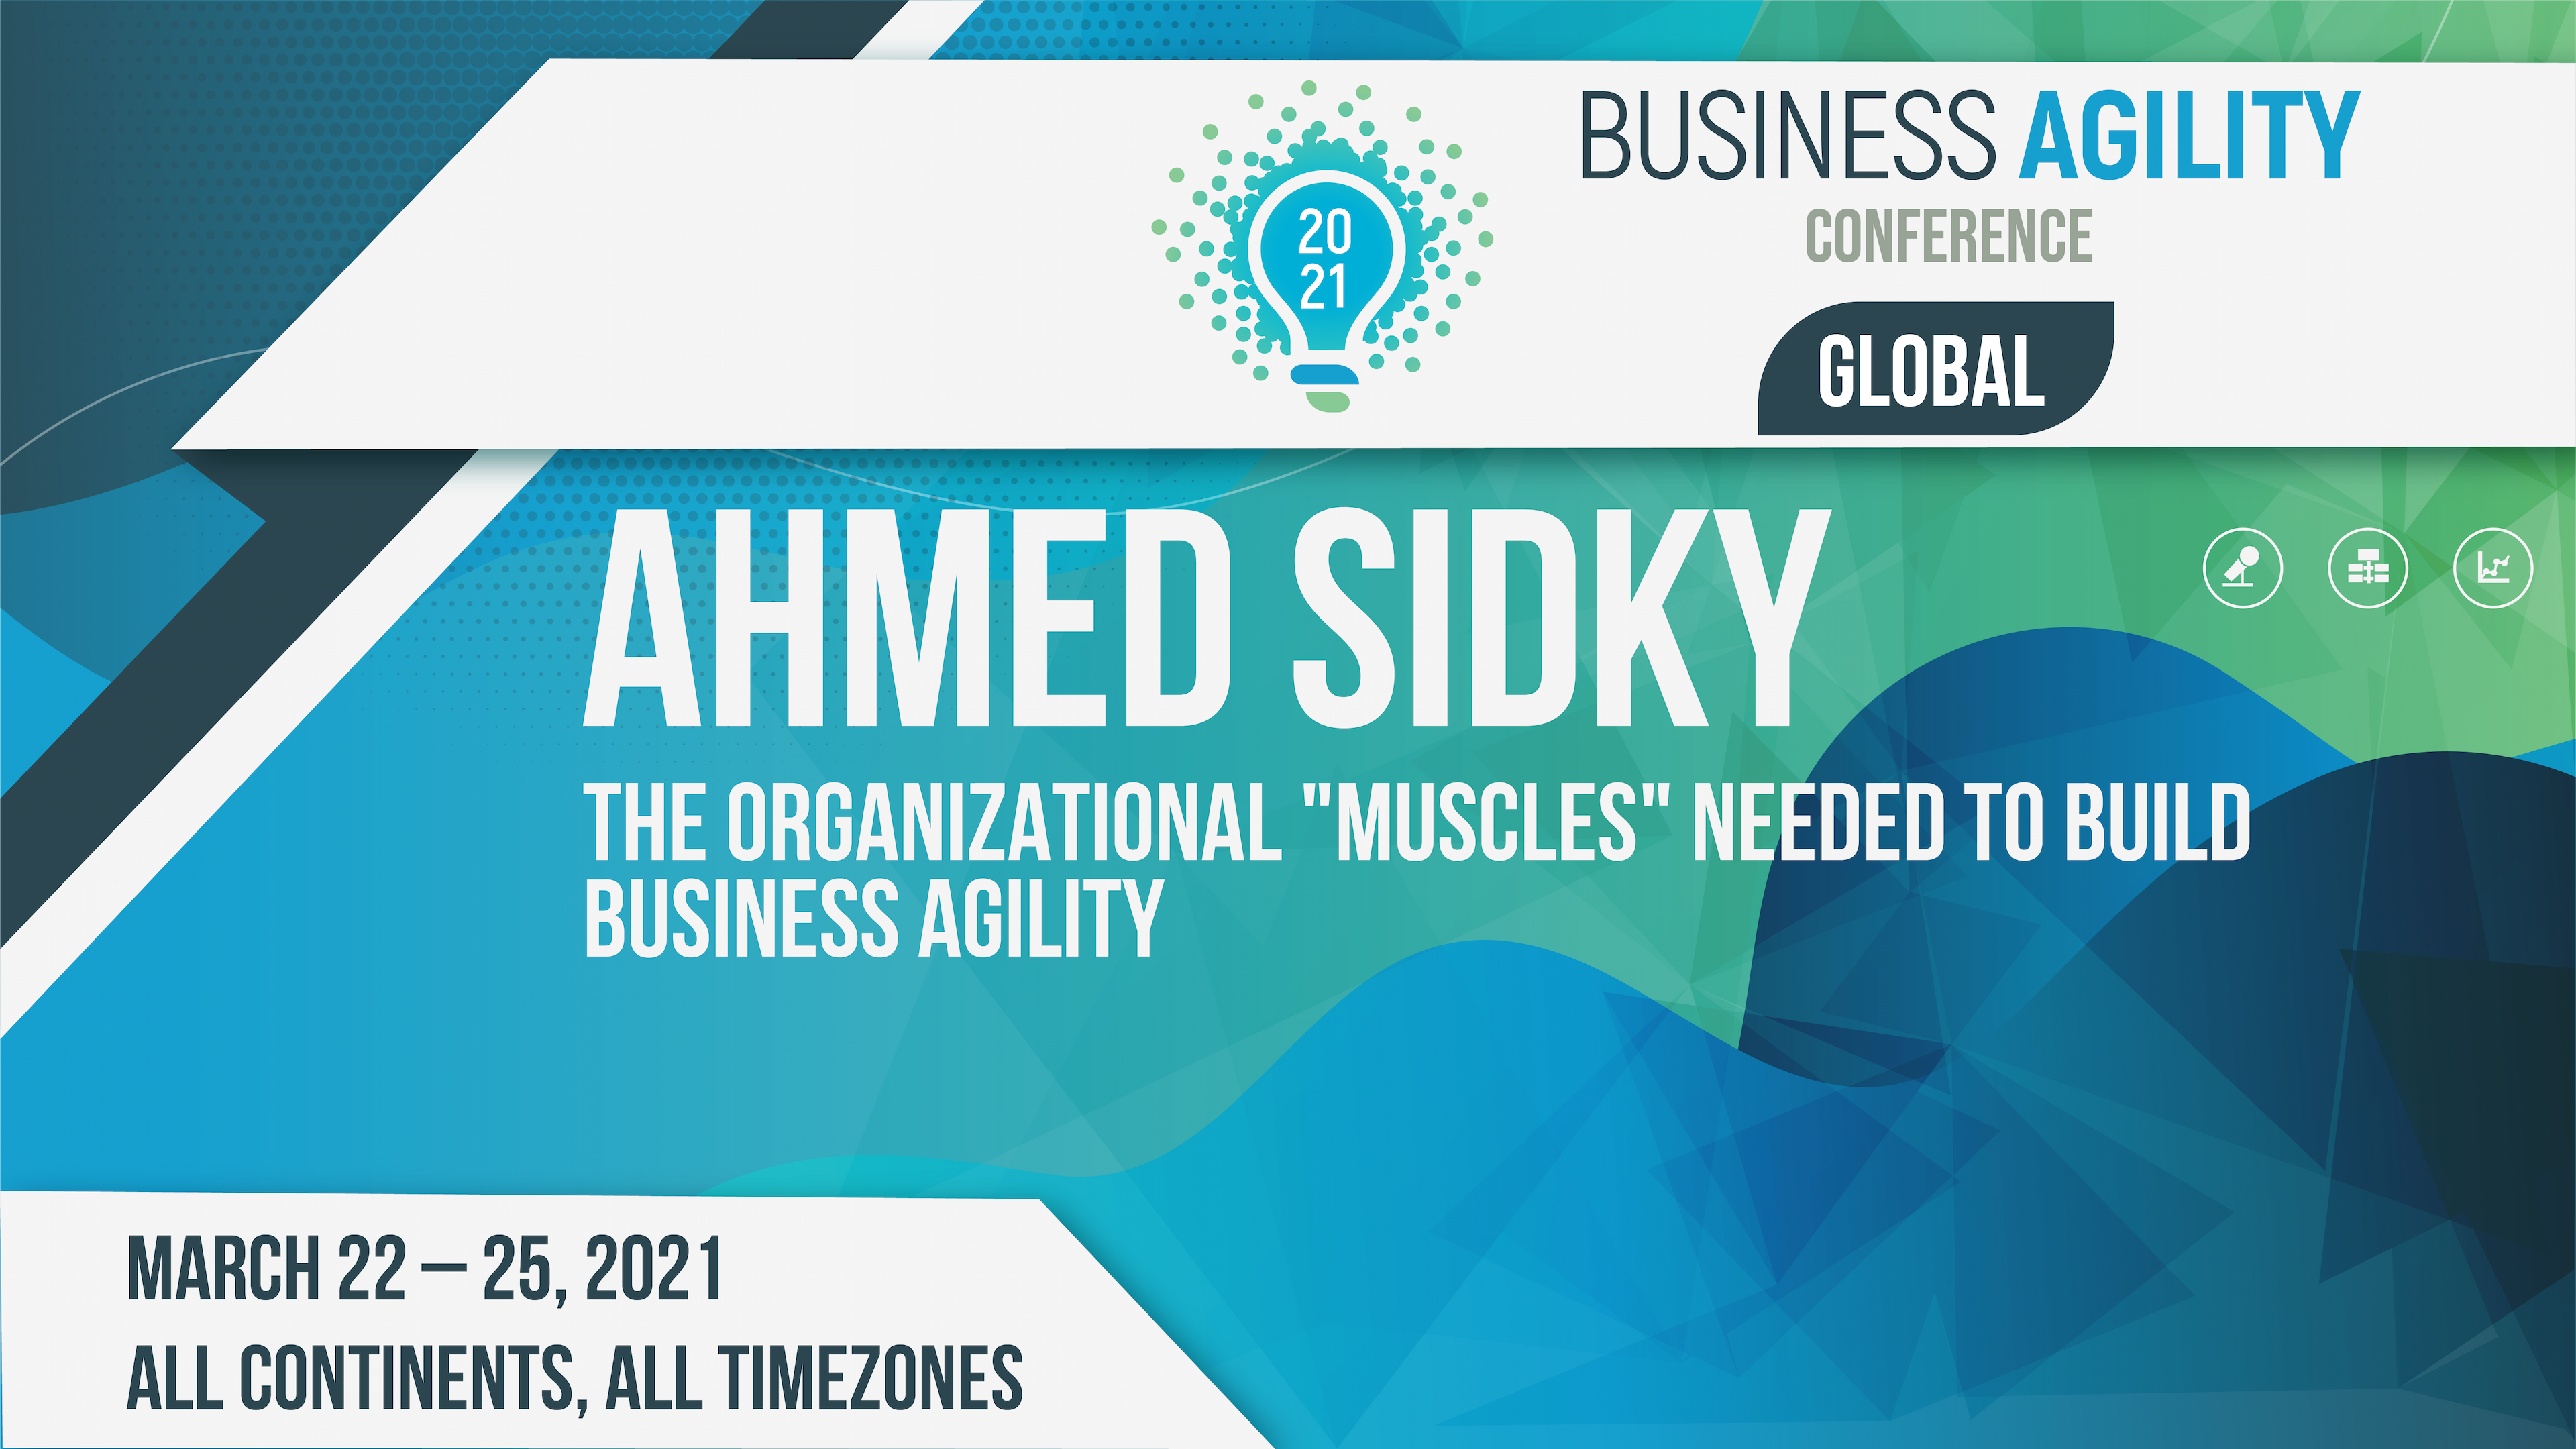 The Organizational "Muscles" needed to Build Business Agility